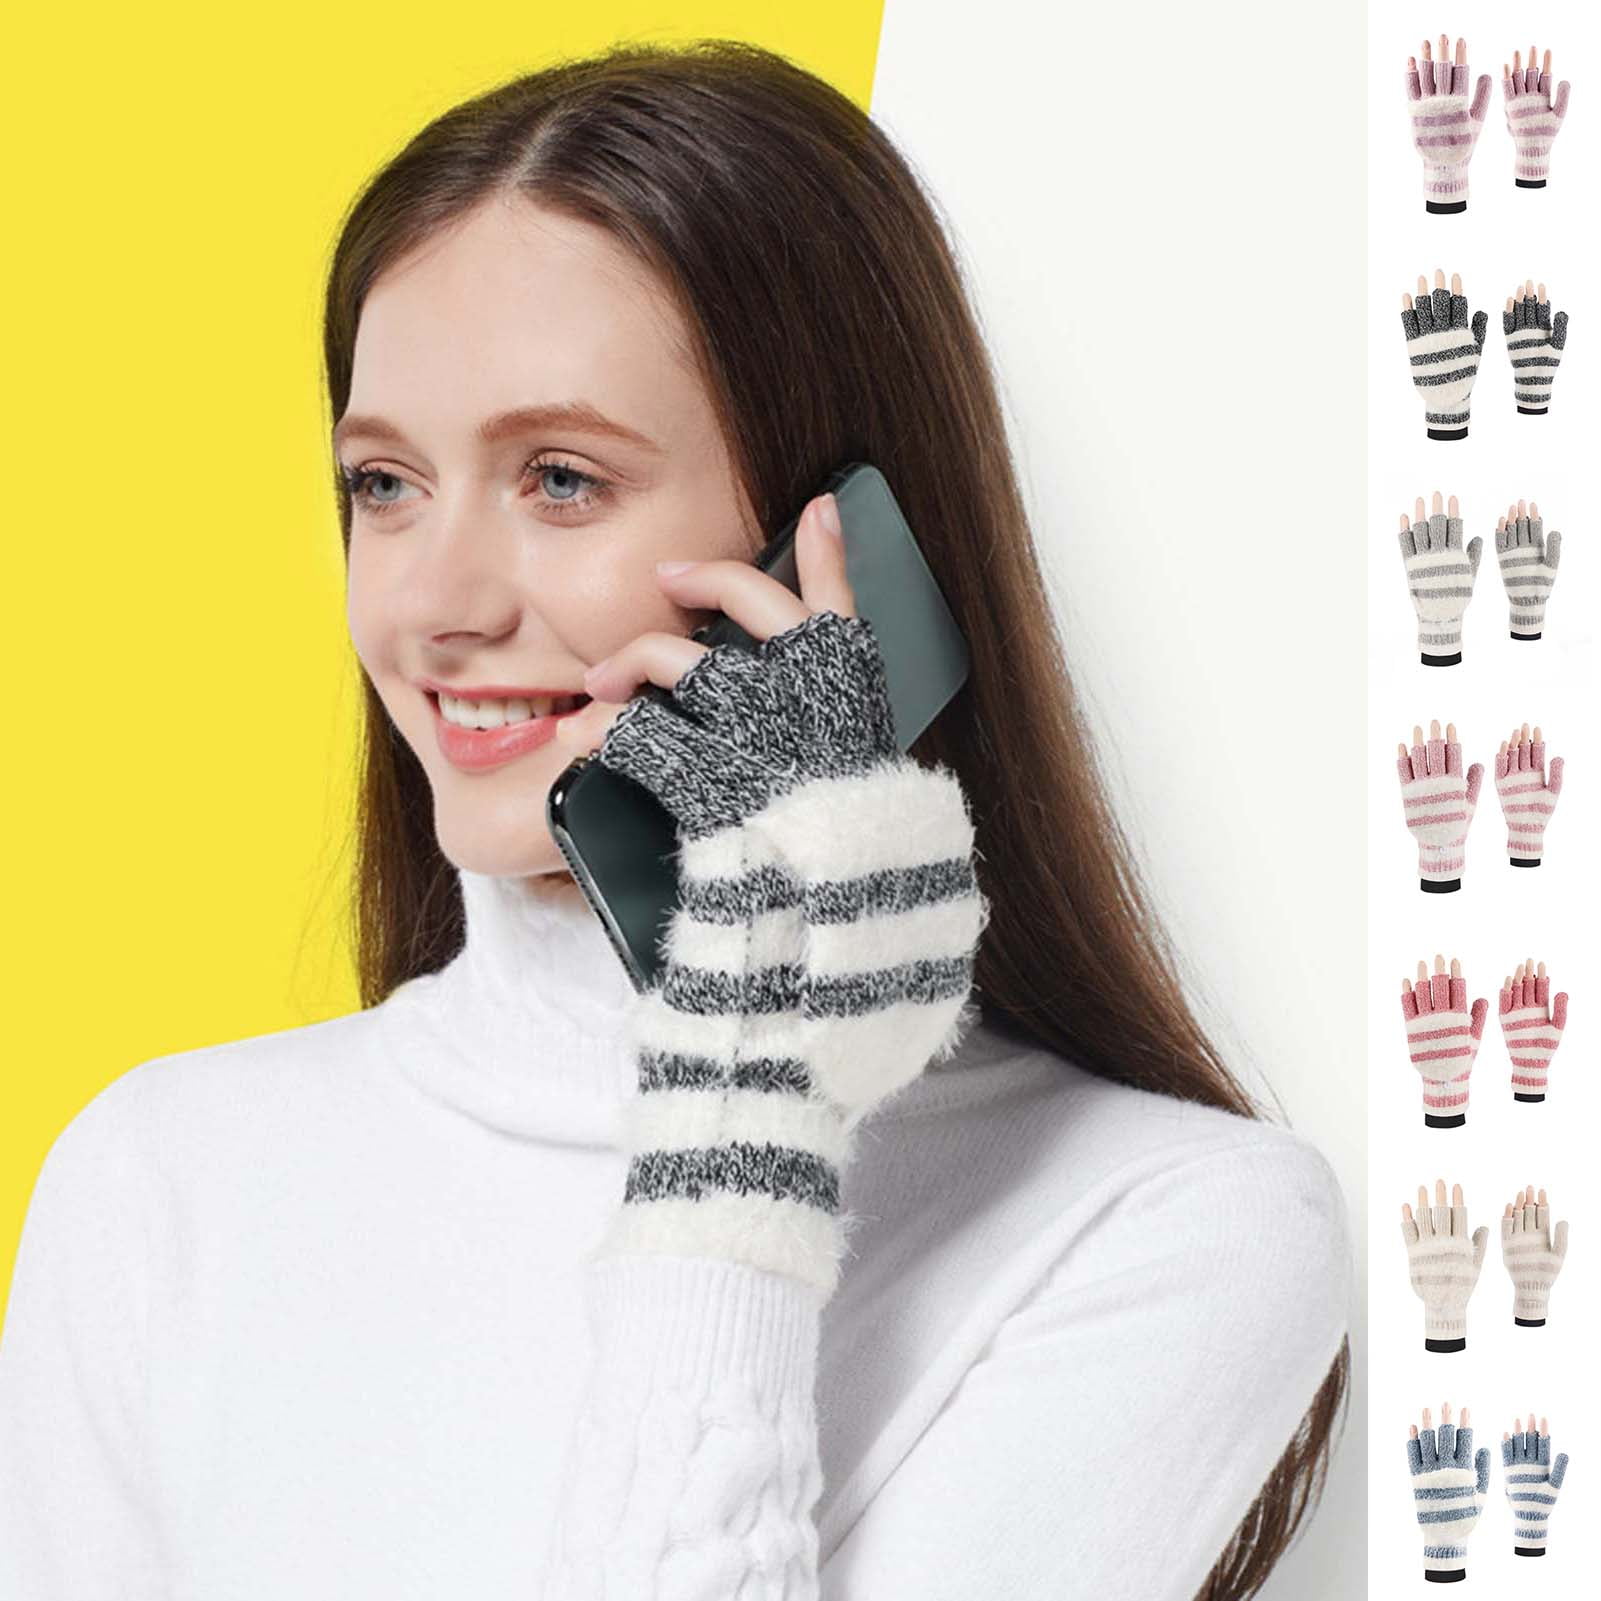 womens Knitted Convertible Fingerless Gloves With Mitten Flap Cover 